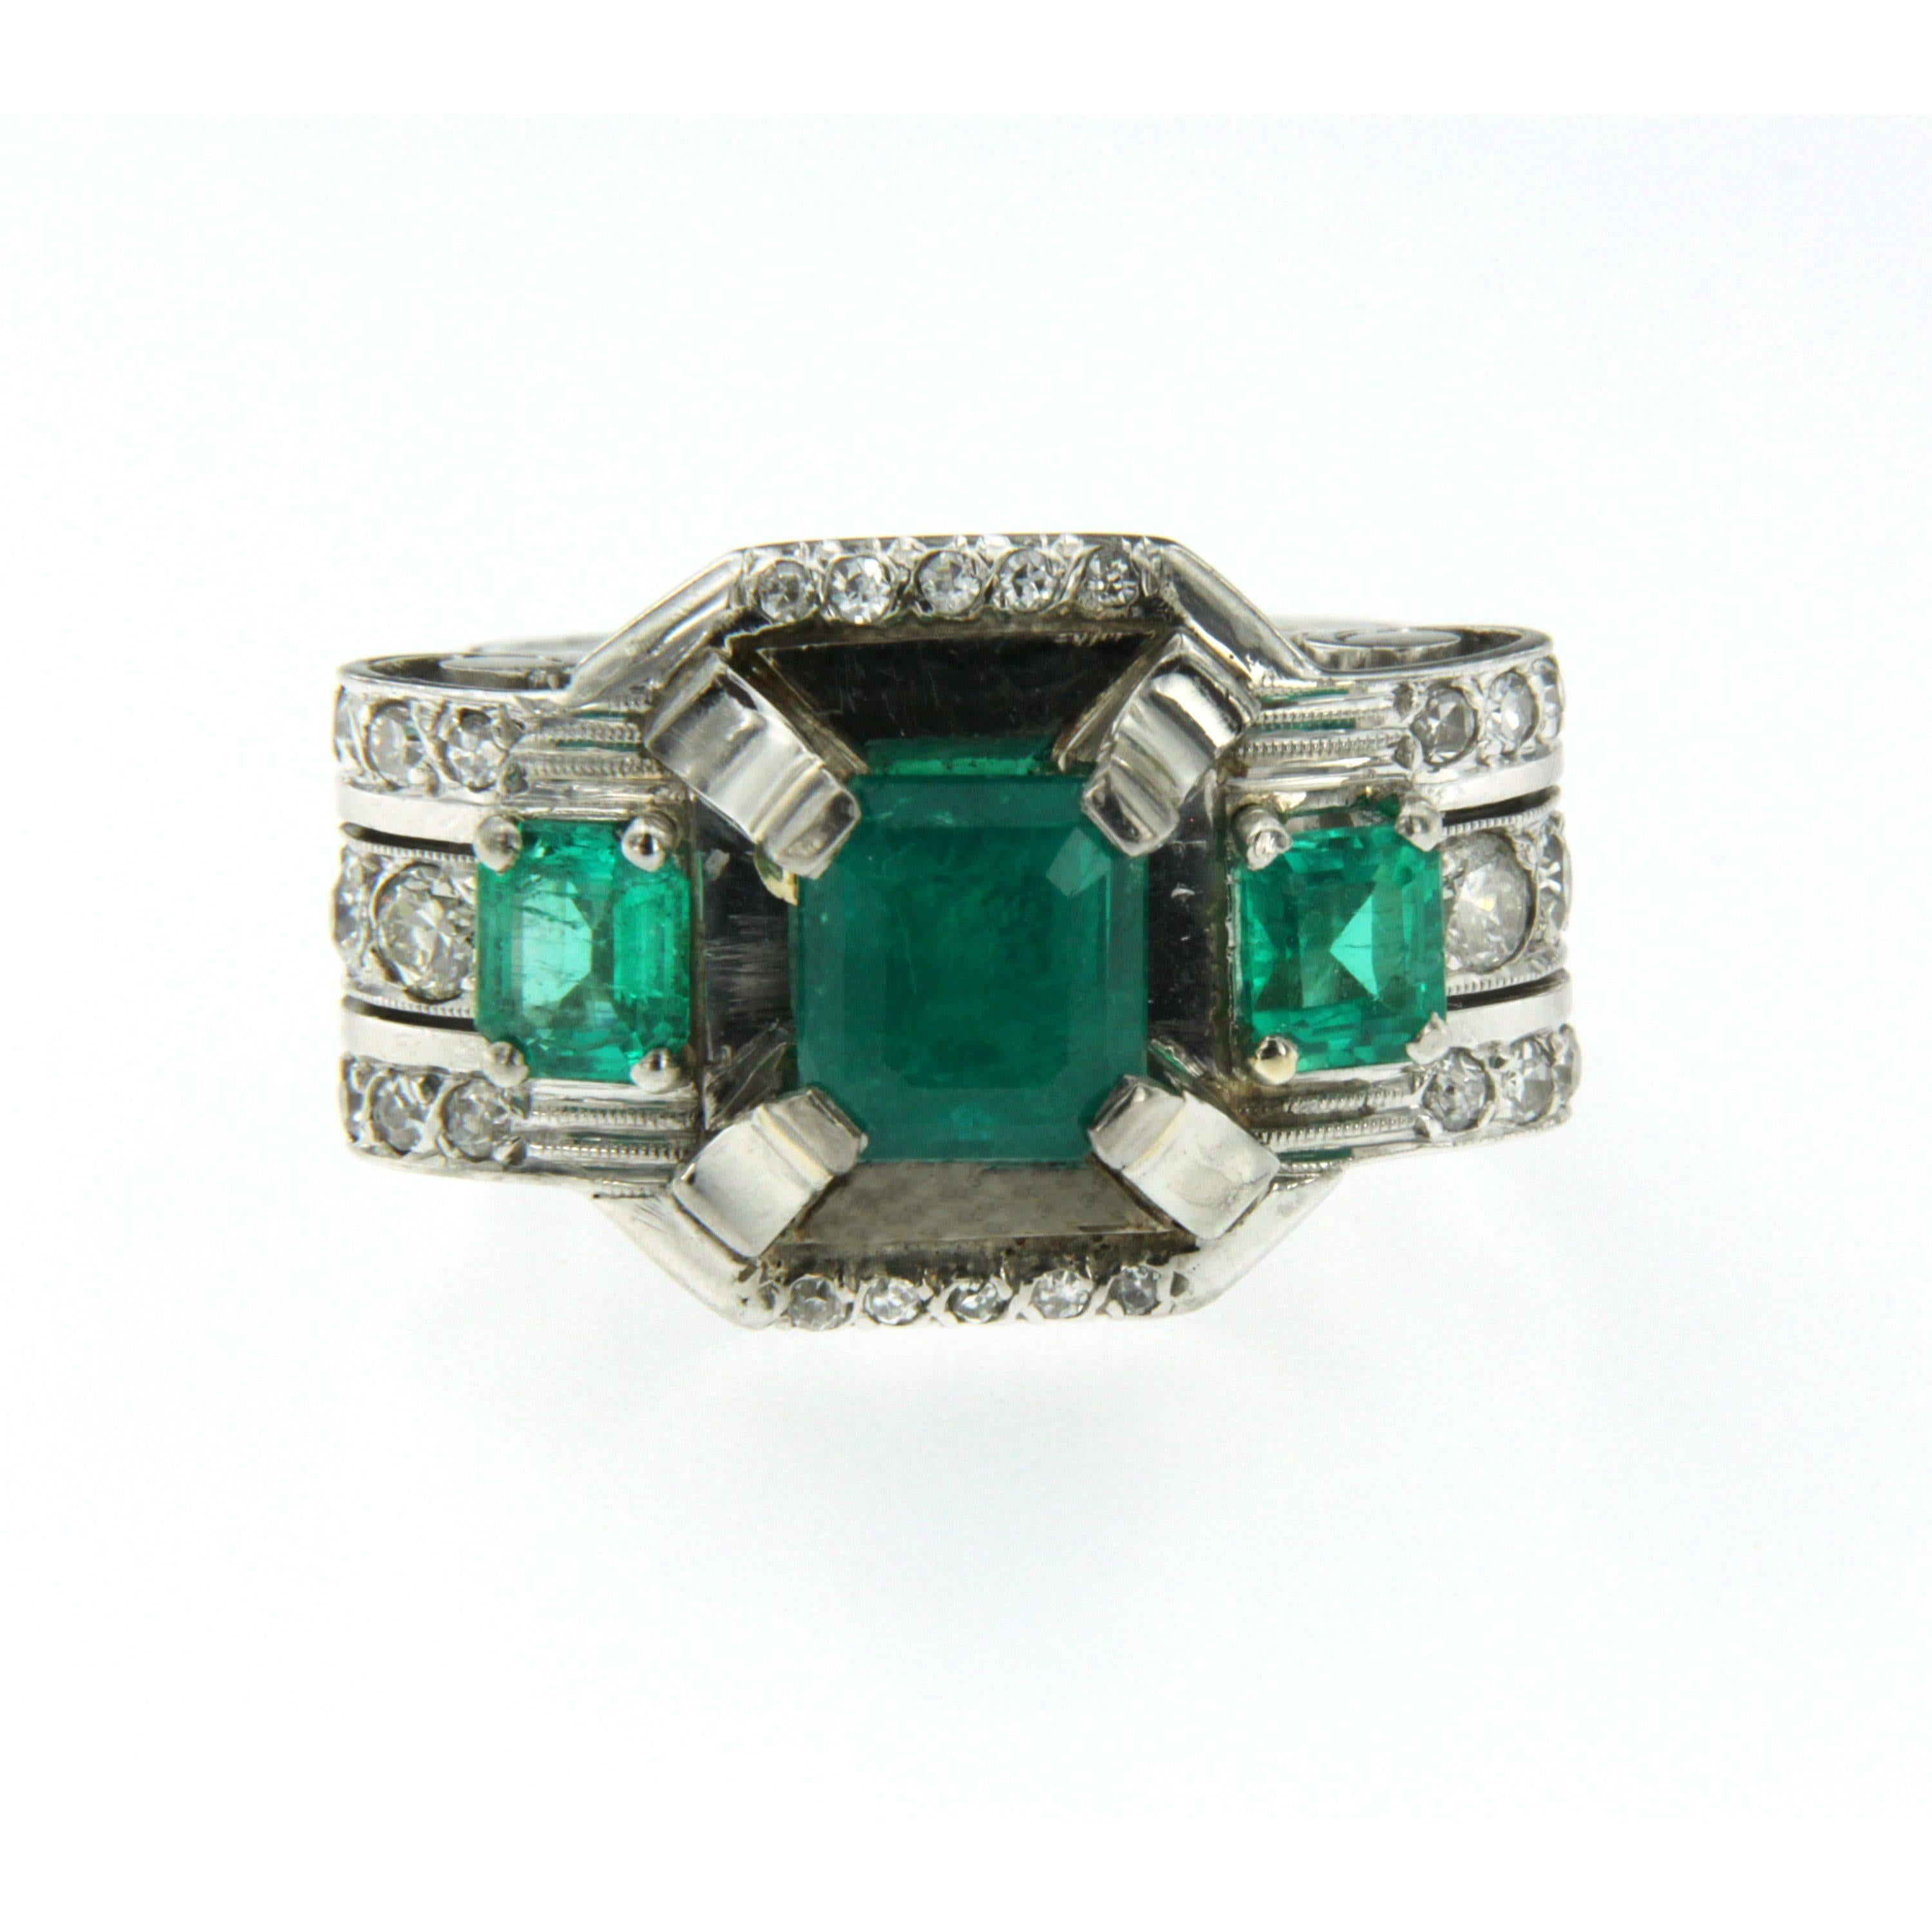 Stunning Art Deco Platinum ring of great quality set in the center with a beautiful Green Colombian Emerald approx. 3.00 carats, and surrounded by approx. 0.30 carat of round brilliant cut diamonds. Circa 1930

CONDITION: Pre-owned 
METAL: